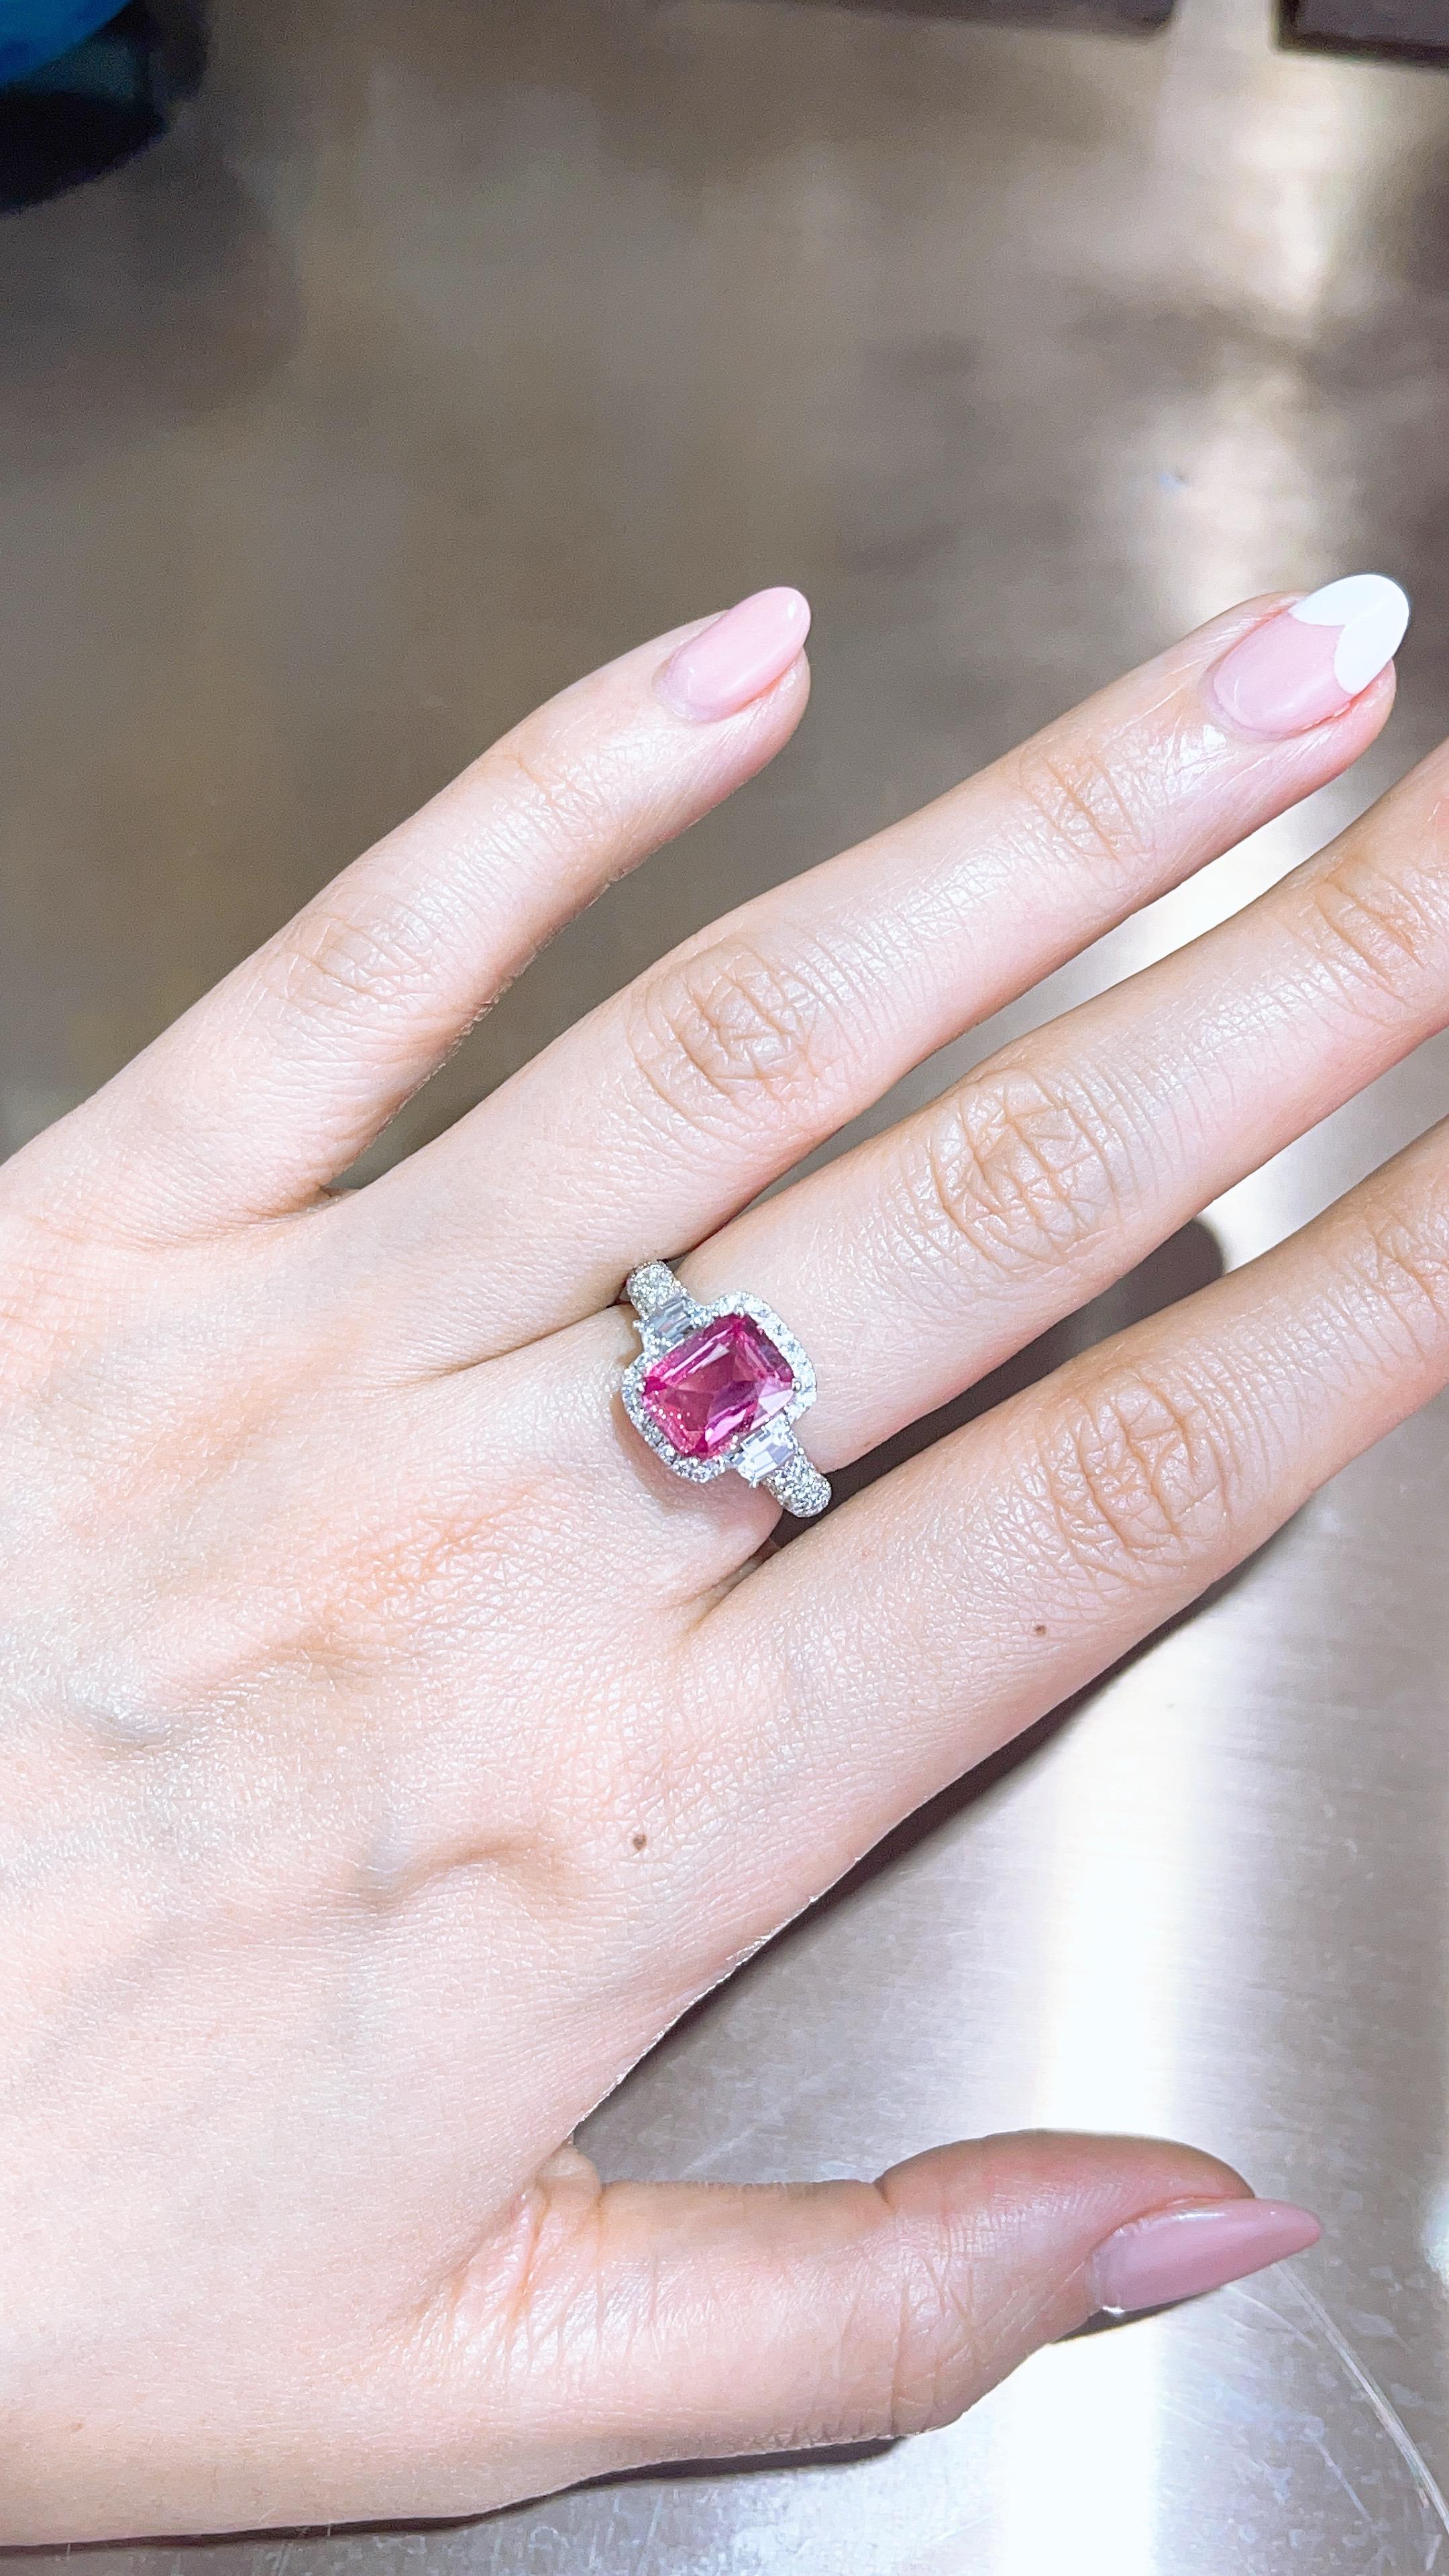 This ring present a 2.64 carat unheated emerald cut  Purple - Pink sapphire set with 2 white diamond on 2 side,  finished in 18K white gold  White diamond on the side total 0.65 ct, and others white diamond 1.27ct . 

The stone is absolutely clean